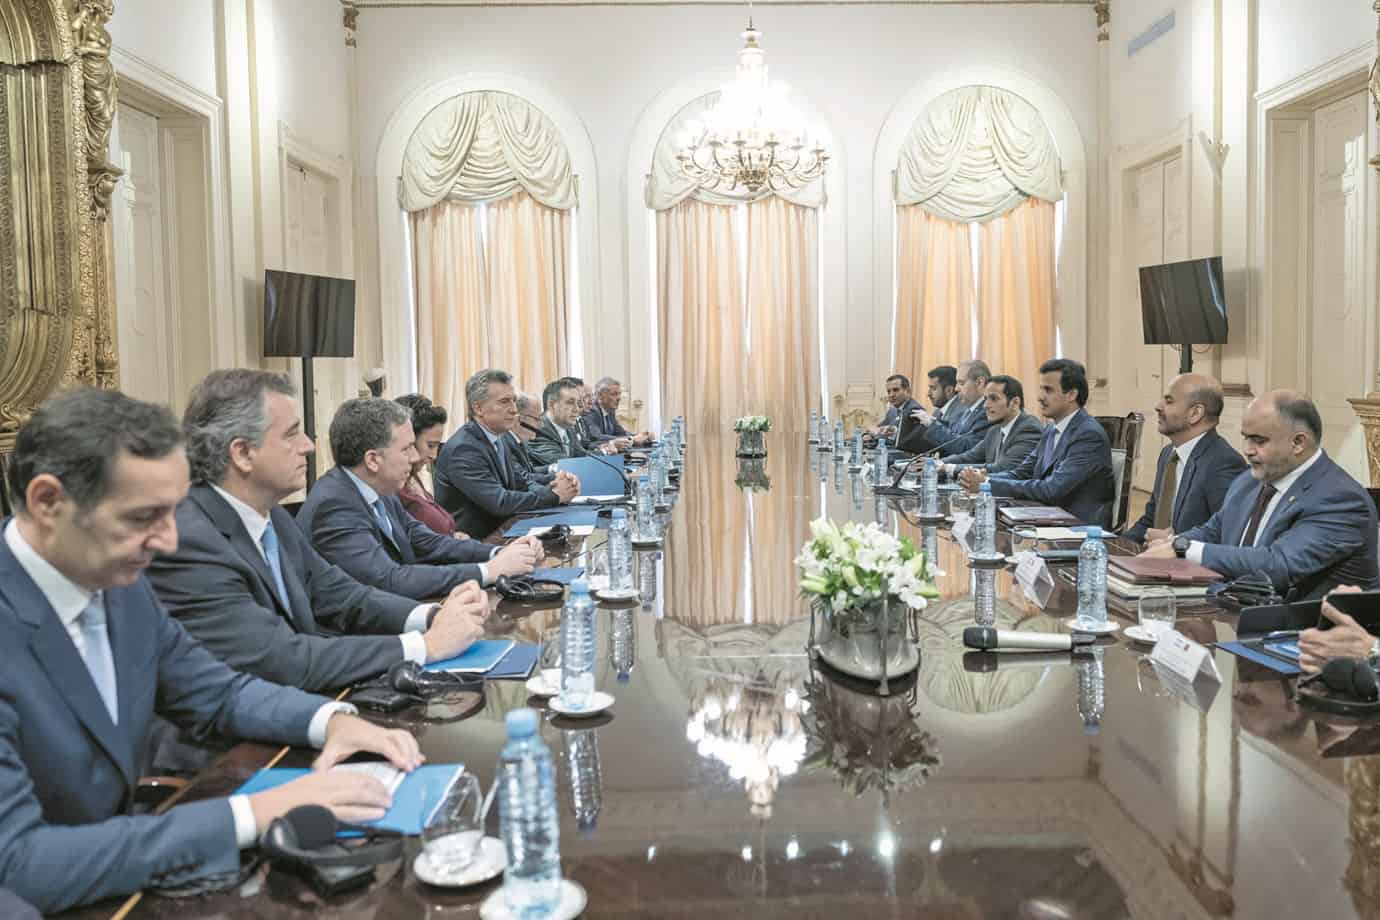 Cabinet praises outcome of Amir’s South America visit